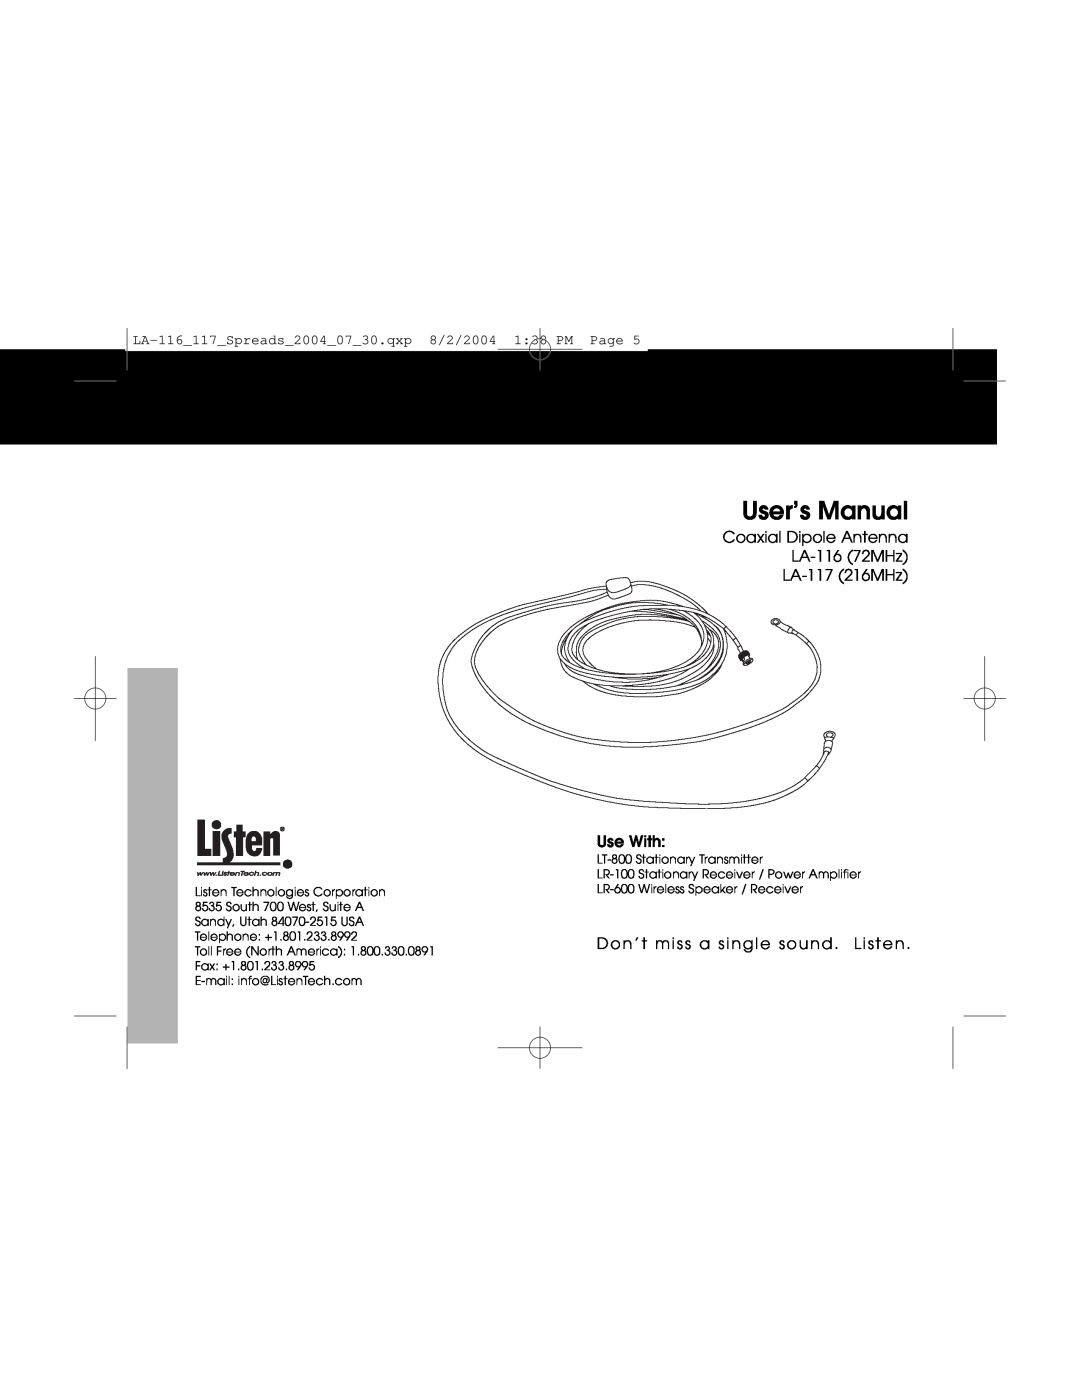 Listen Technologies user manual Coaxial Dipole Antenna LA-11672MHz LA-117216MHz, Use With 